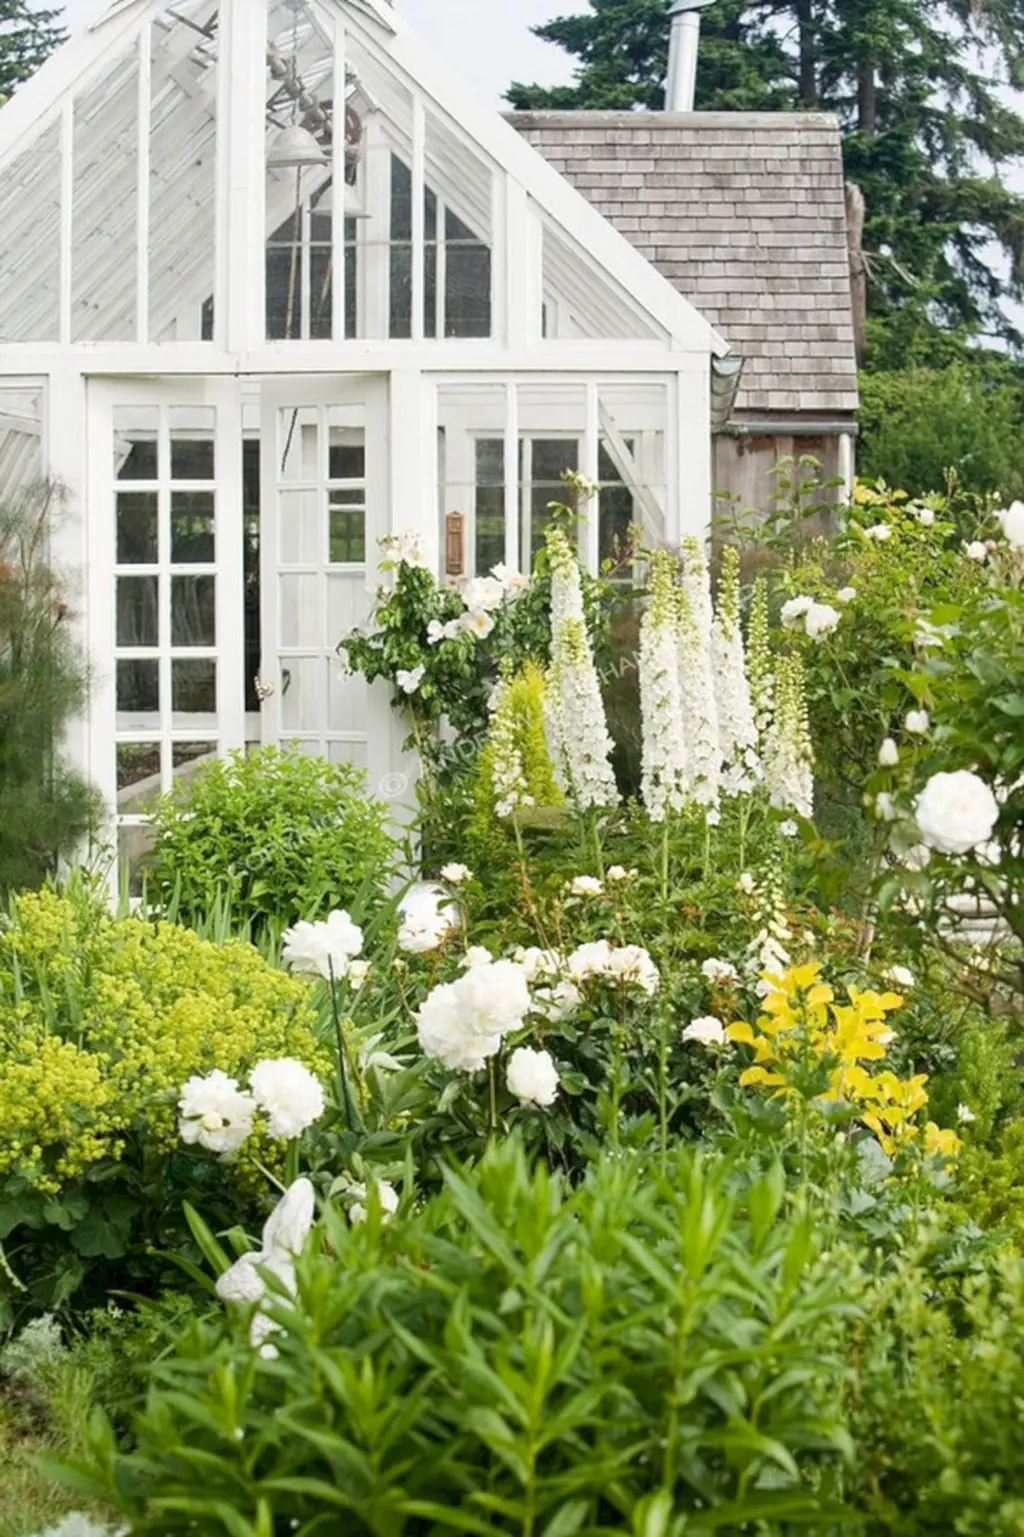 Cottage garden with whites and yellows